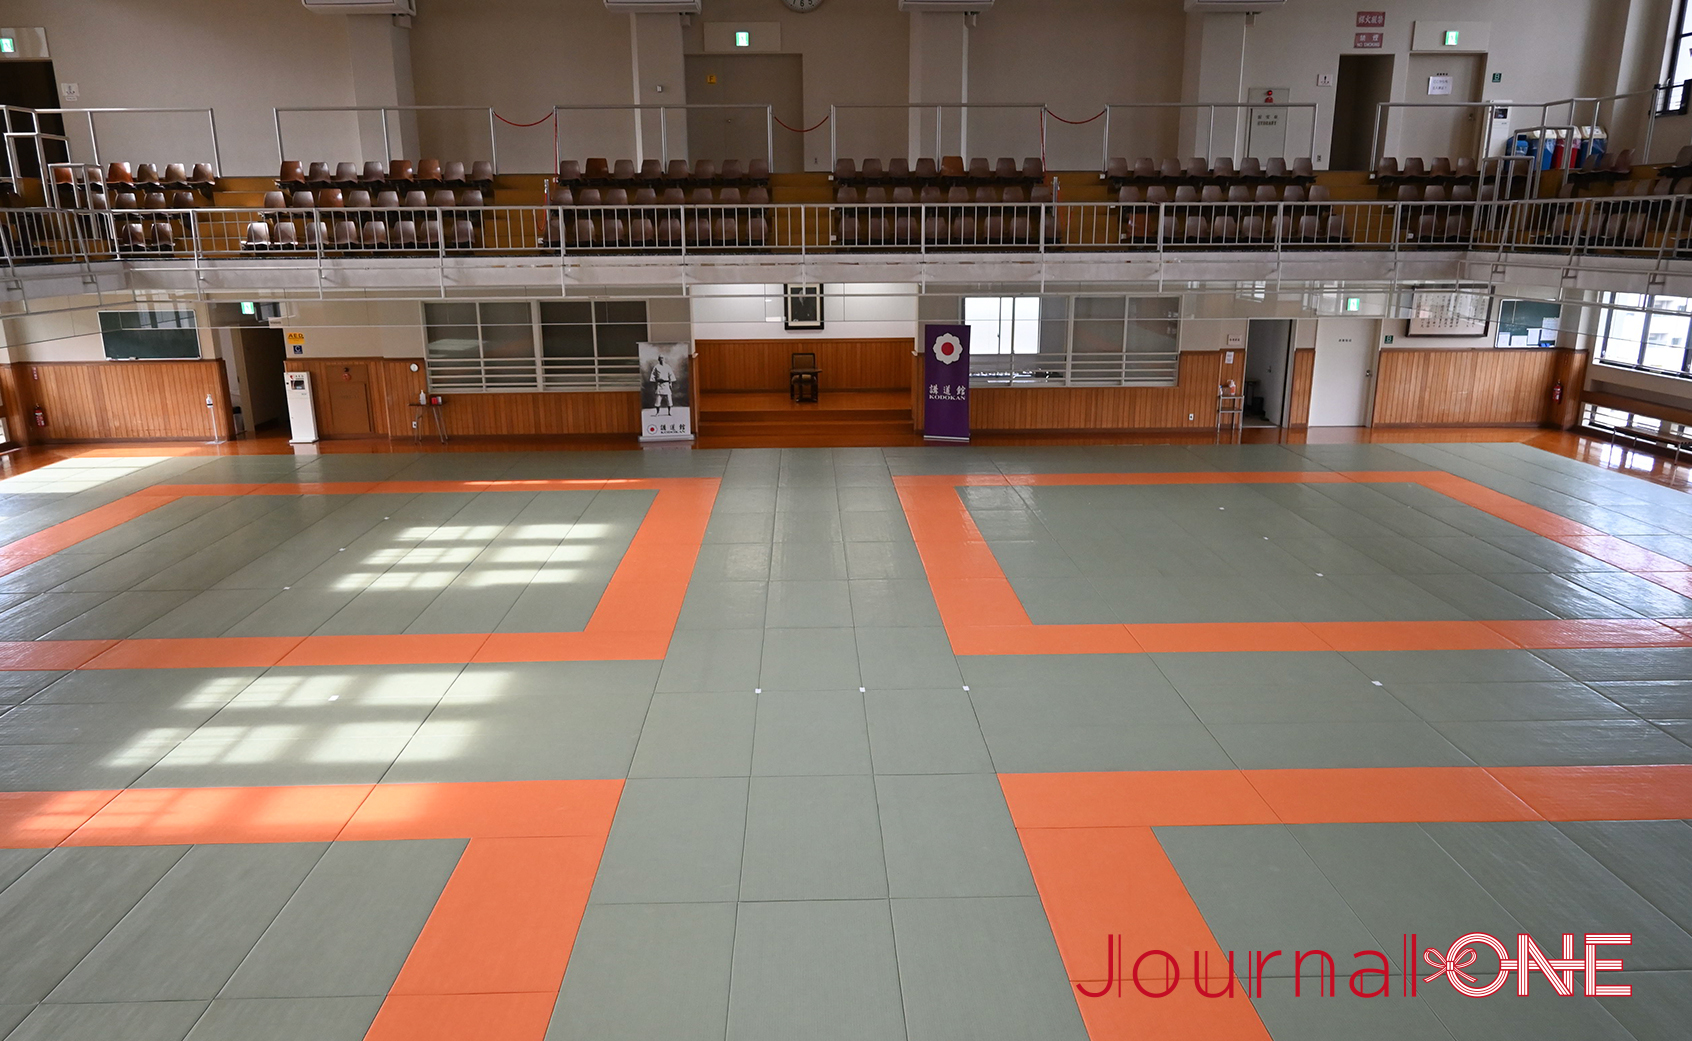 The main dojo on the 7th floor at the Kodokan institute, photo by Journal-ONE